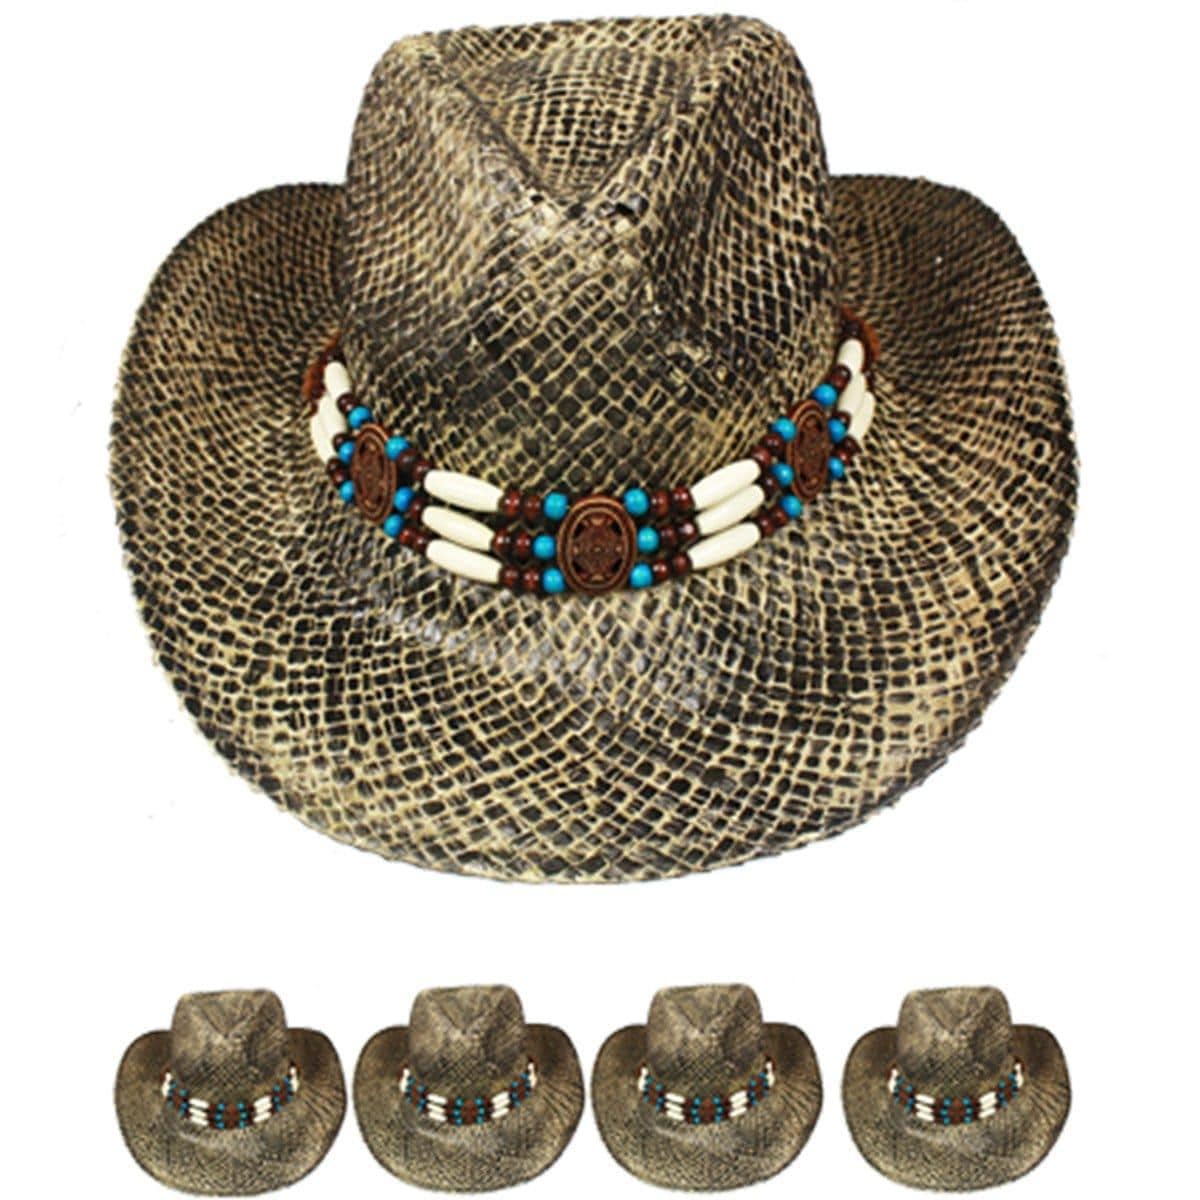 Buy Costume Accessories Brown cowboy hat for adults sold at Party Expert